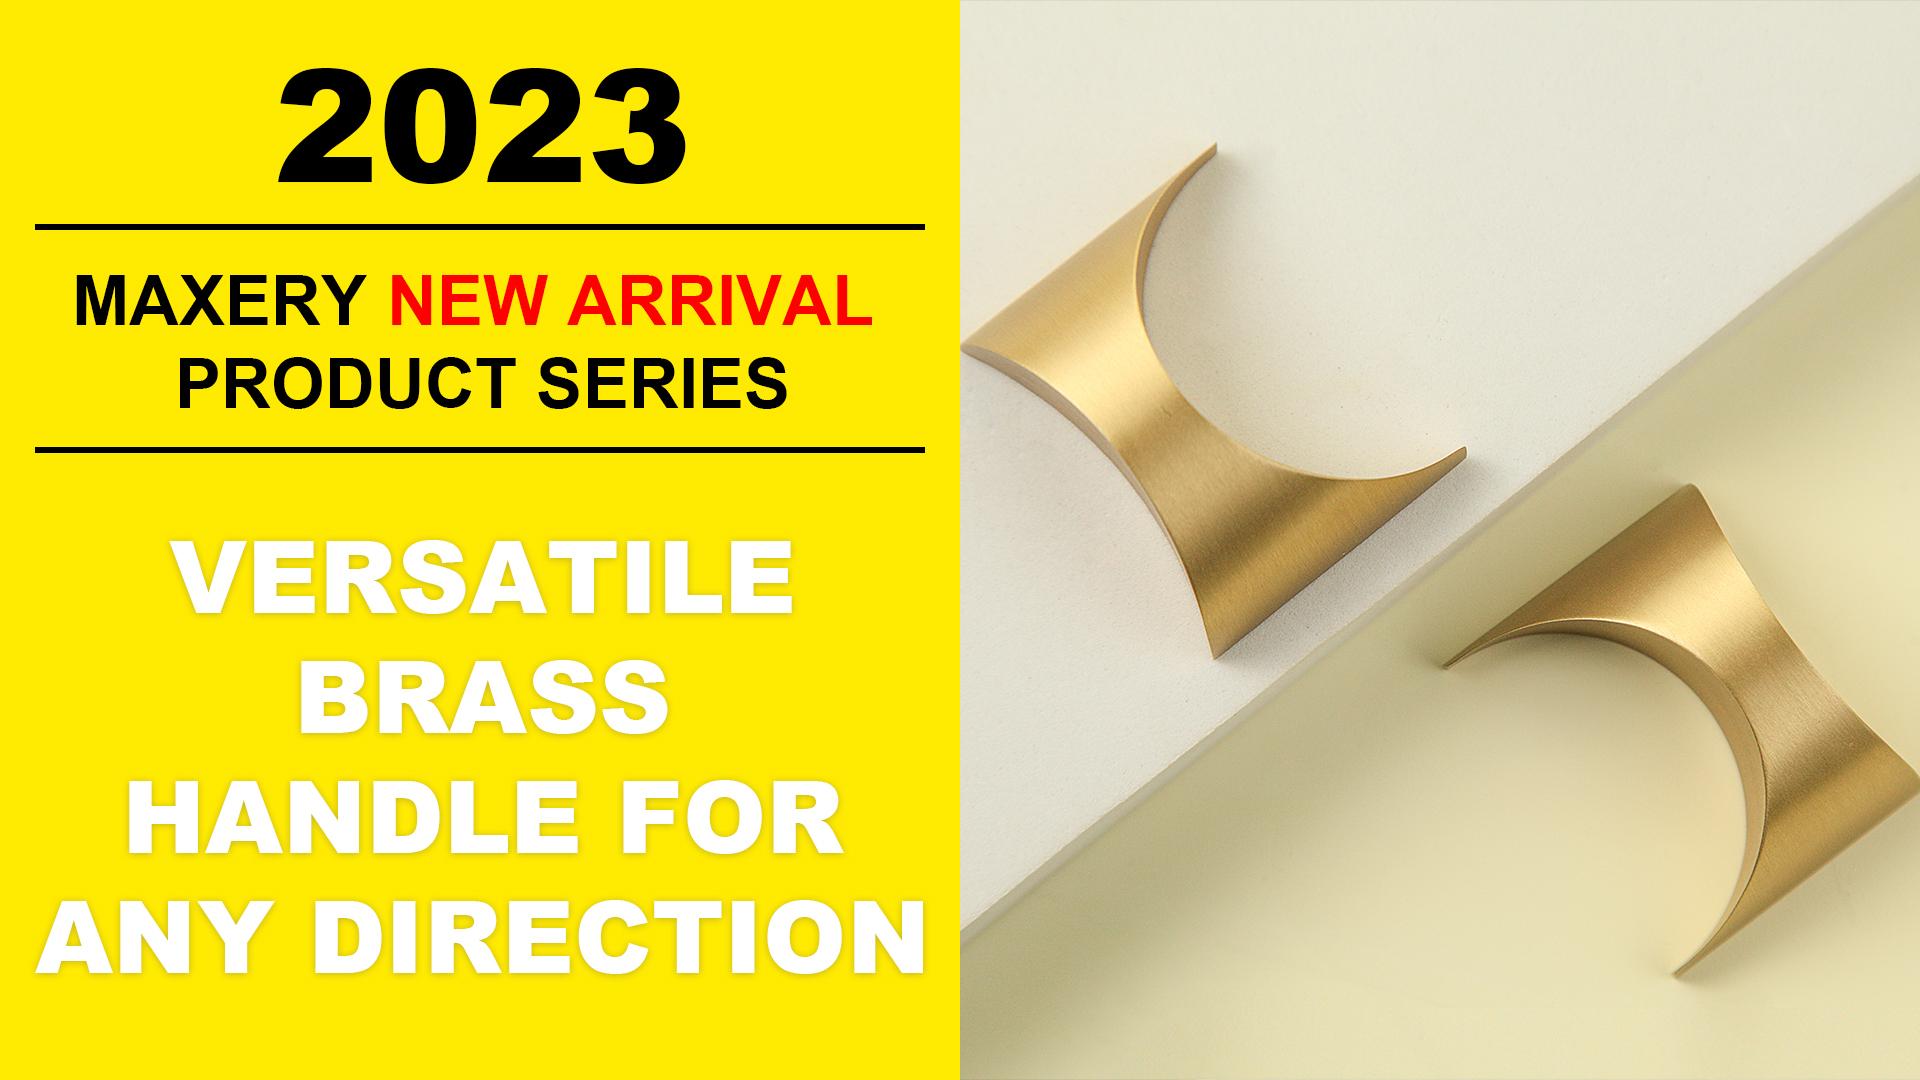 Maxery New Arrival product introduction-Versatile brass handle for several directions